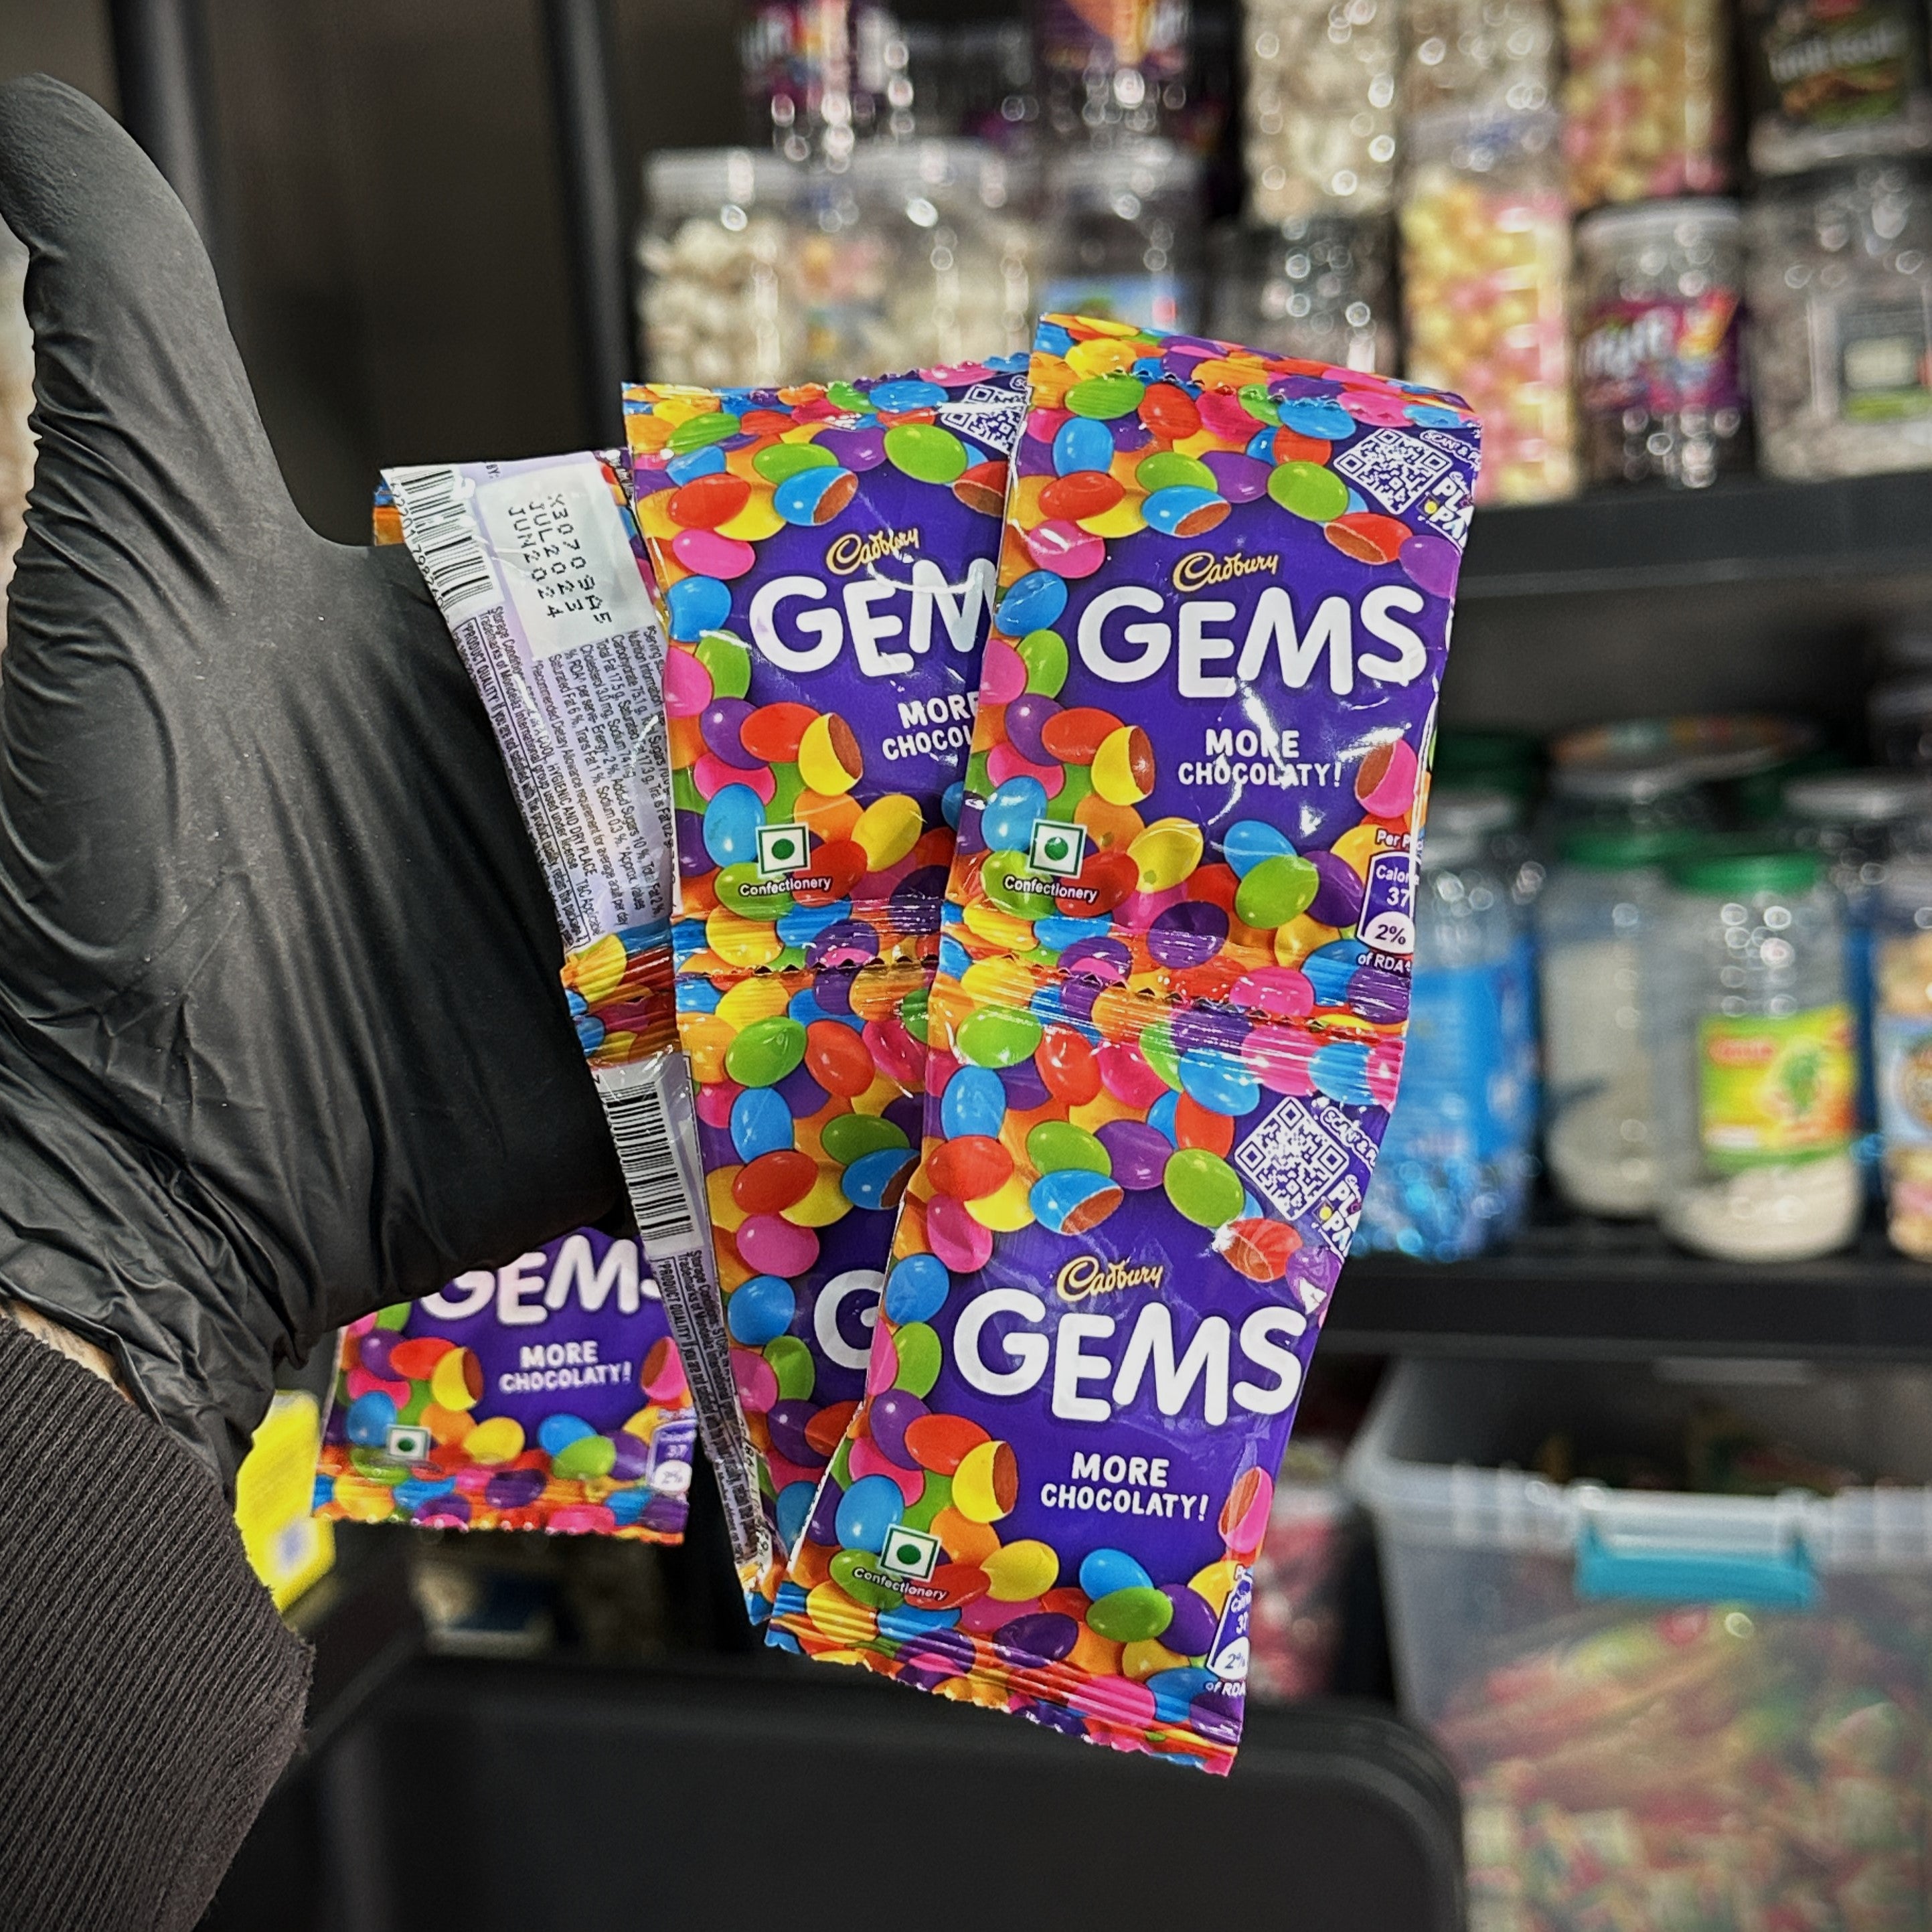 Cadbury Gems Chocolate, 19 g gems is colourful and fun outside Pack of 19Gm  x 5 | eBay